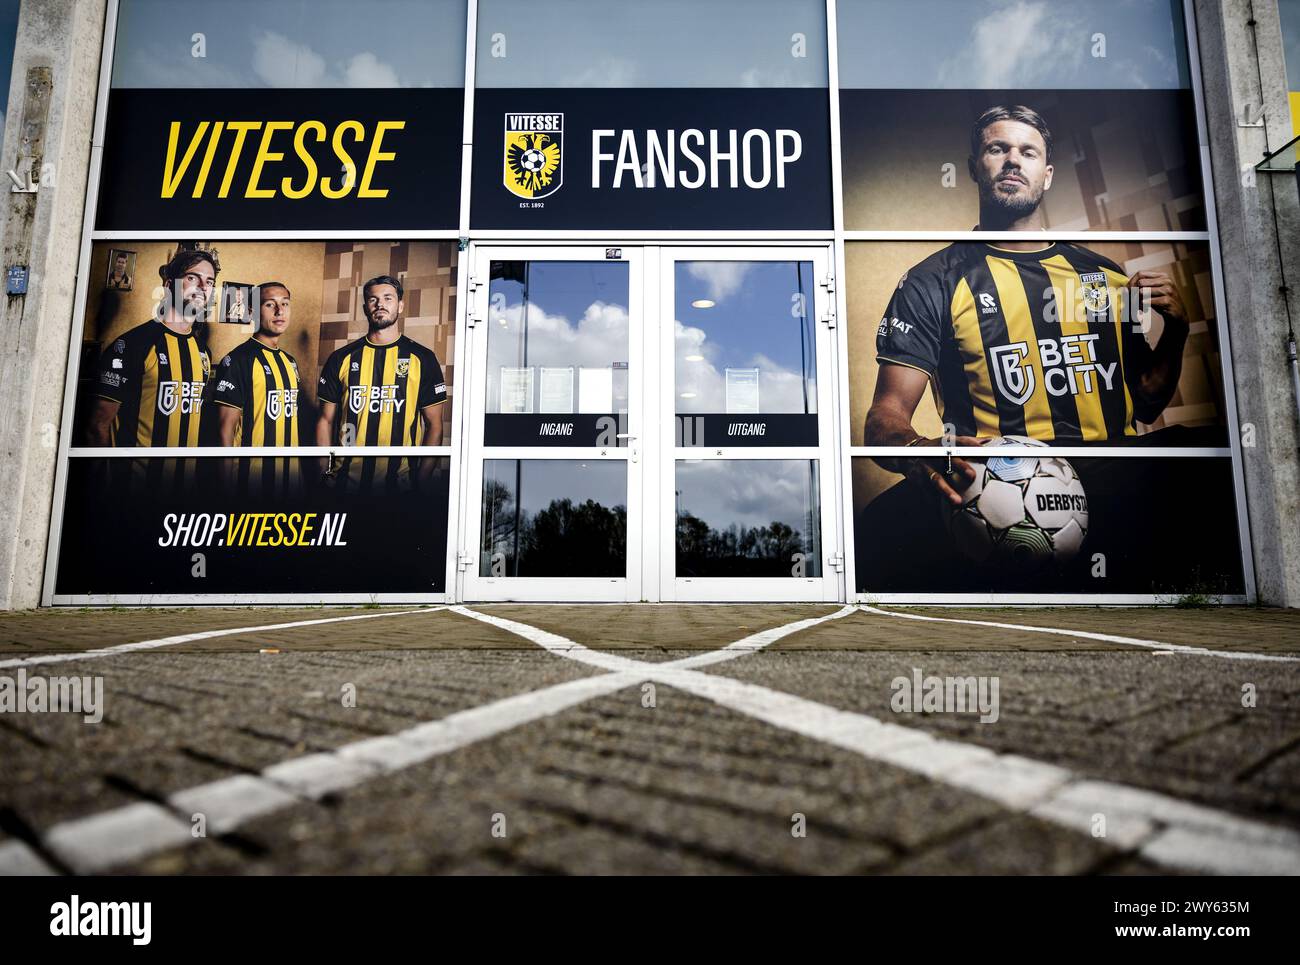 ARNHEM - The fan shop at the GelreDome stadium, home base of football club Vitesse. The football club is concerned about the withdrawal of the professional license. In addition to the financial problems, Vitesse is also having a very difficult year in terms of sport. The club is in seventeenth place and has to fear relegation. ANP SEM VAN DER WAL netherlands out - belgium out Stock Photo